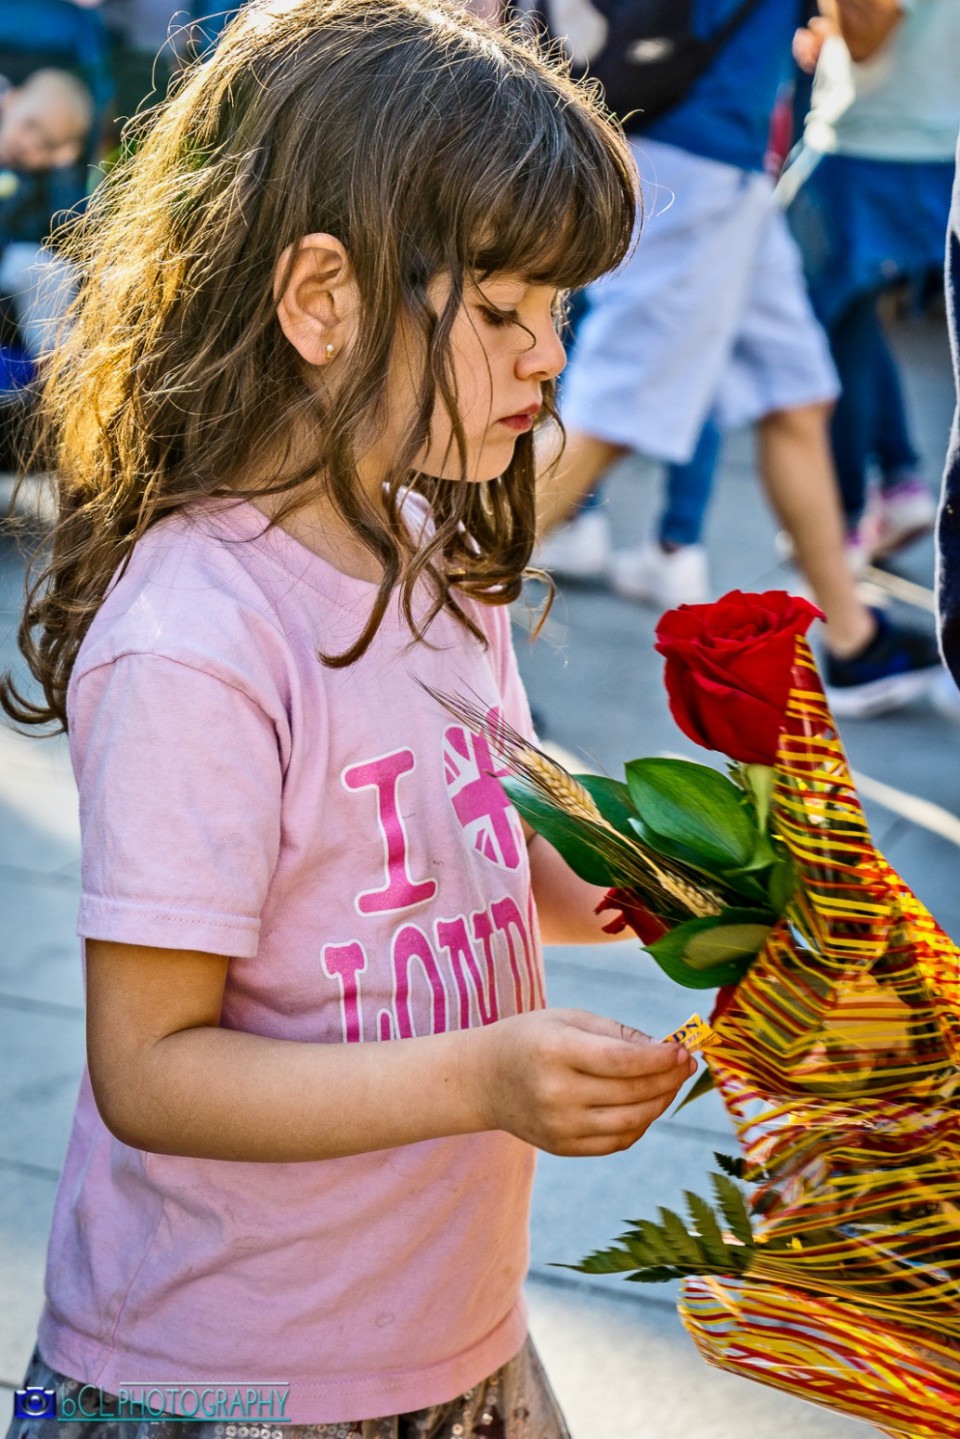 A girl with her rose